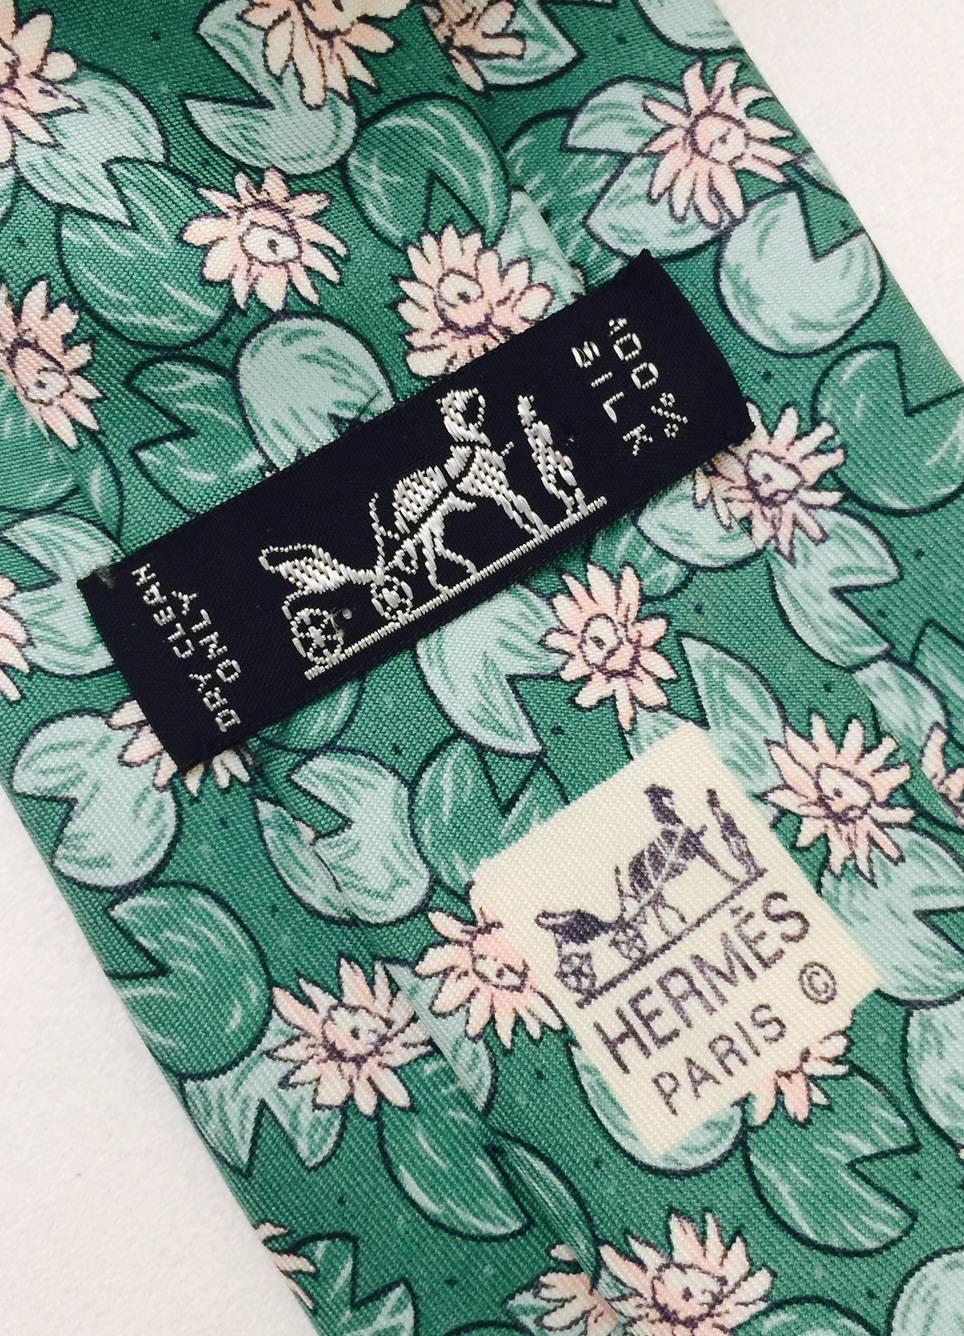 Hermes silk necktie with pretty stylized water lillies in pale pink and greens. Width is 3.5 inches.